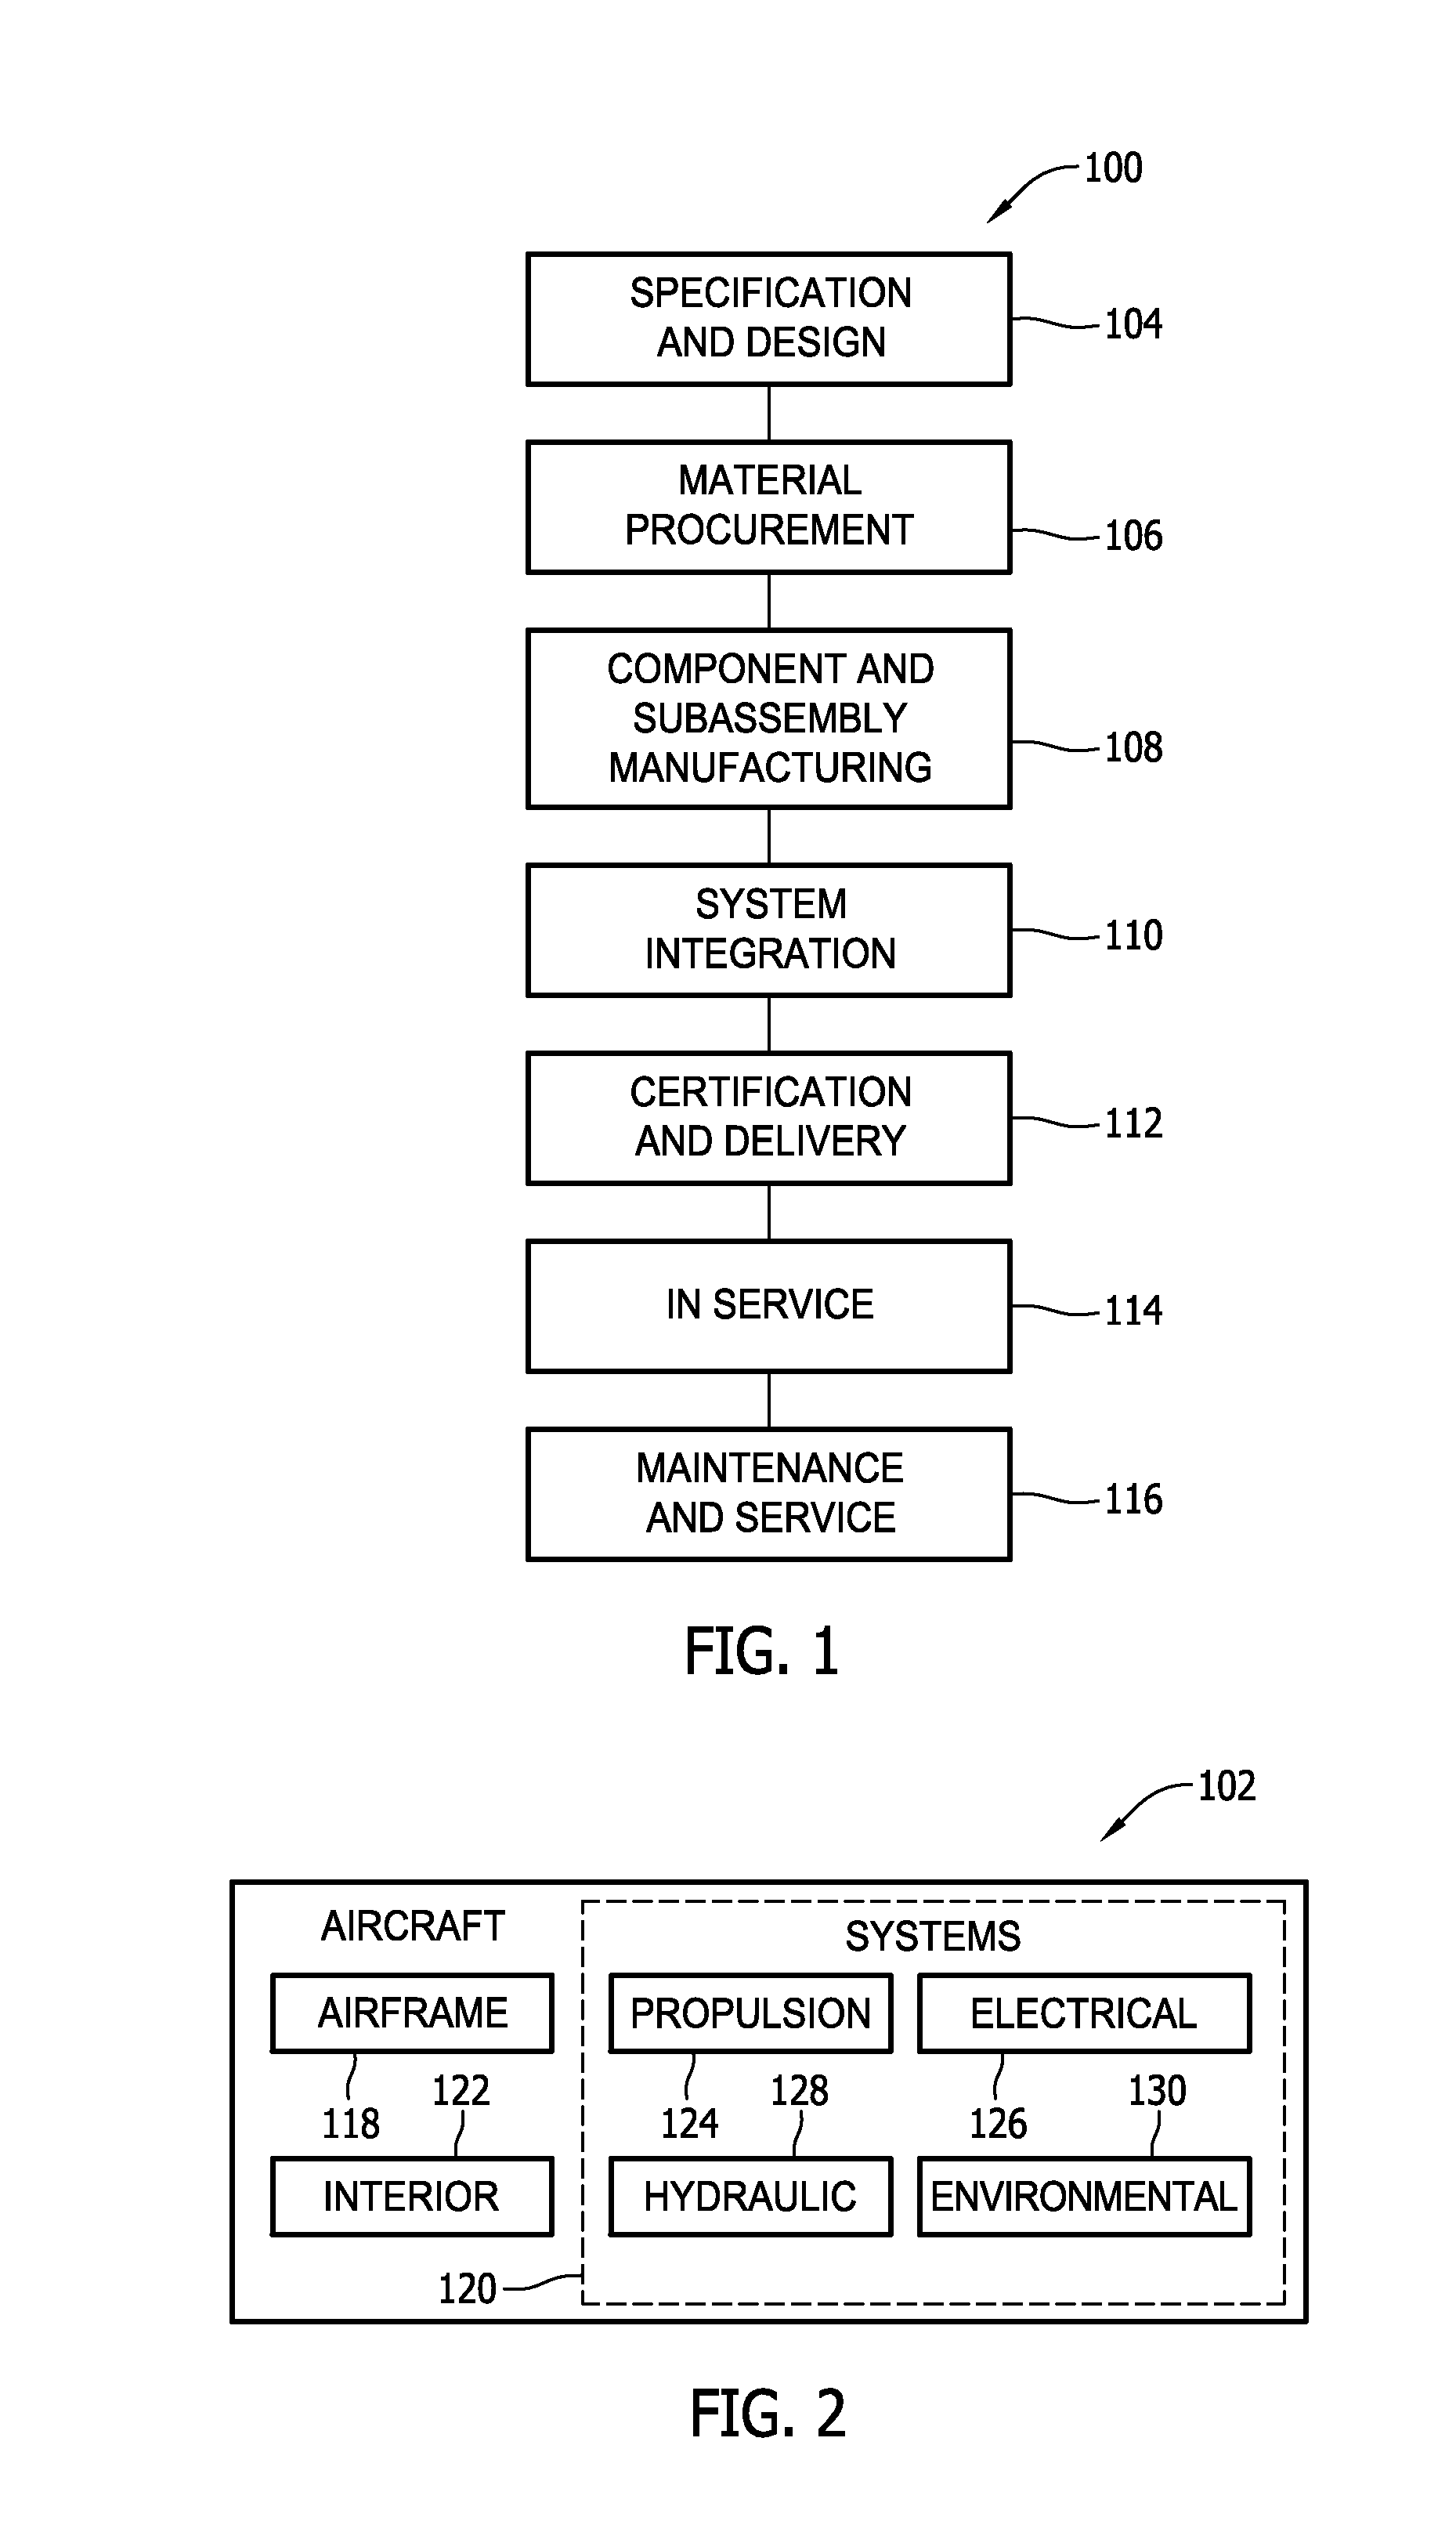 Systems and methods for use in authenticating an object